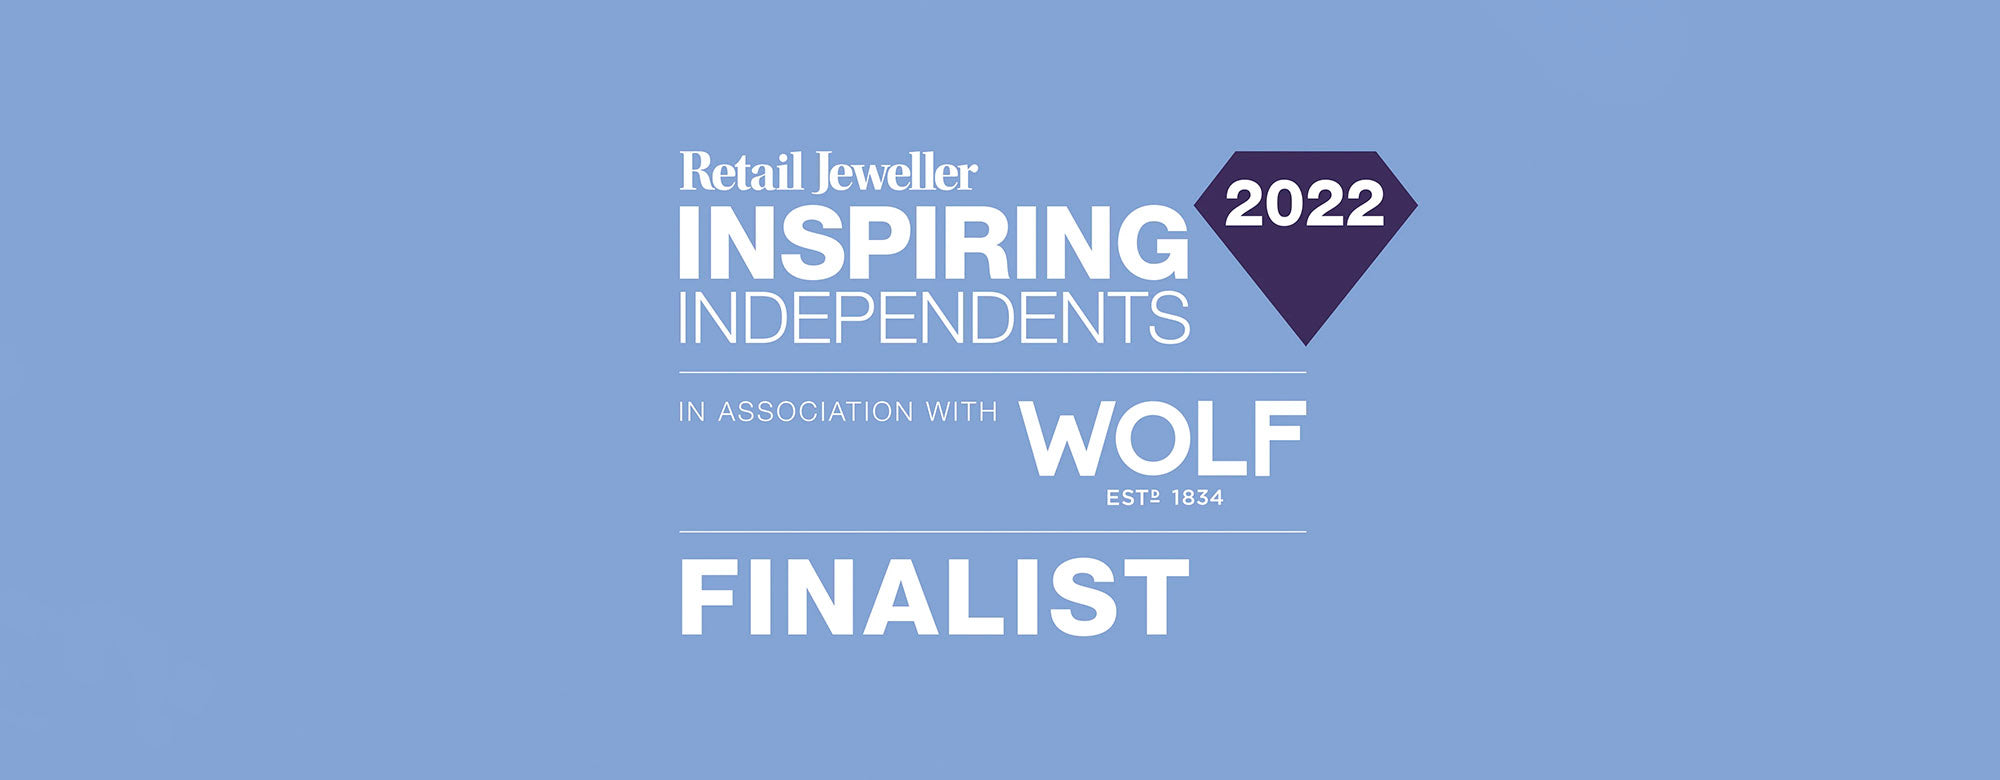 JQ Diamonds Named in top 100 inspiring independent jewellers